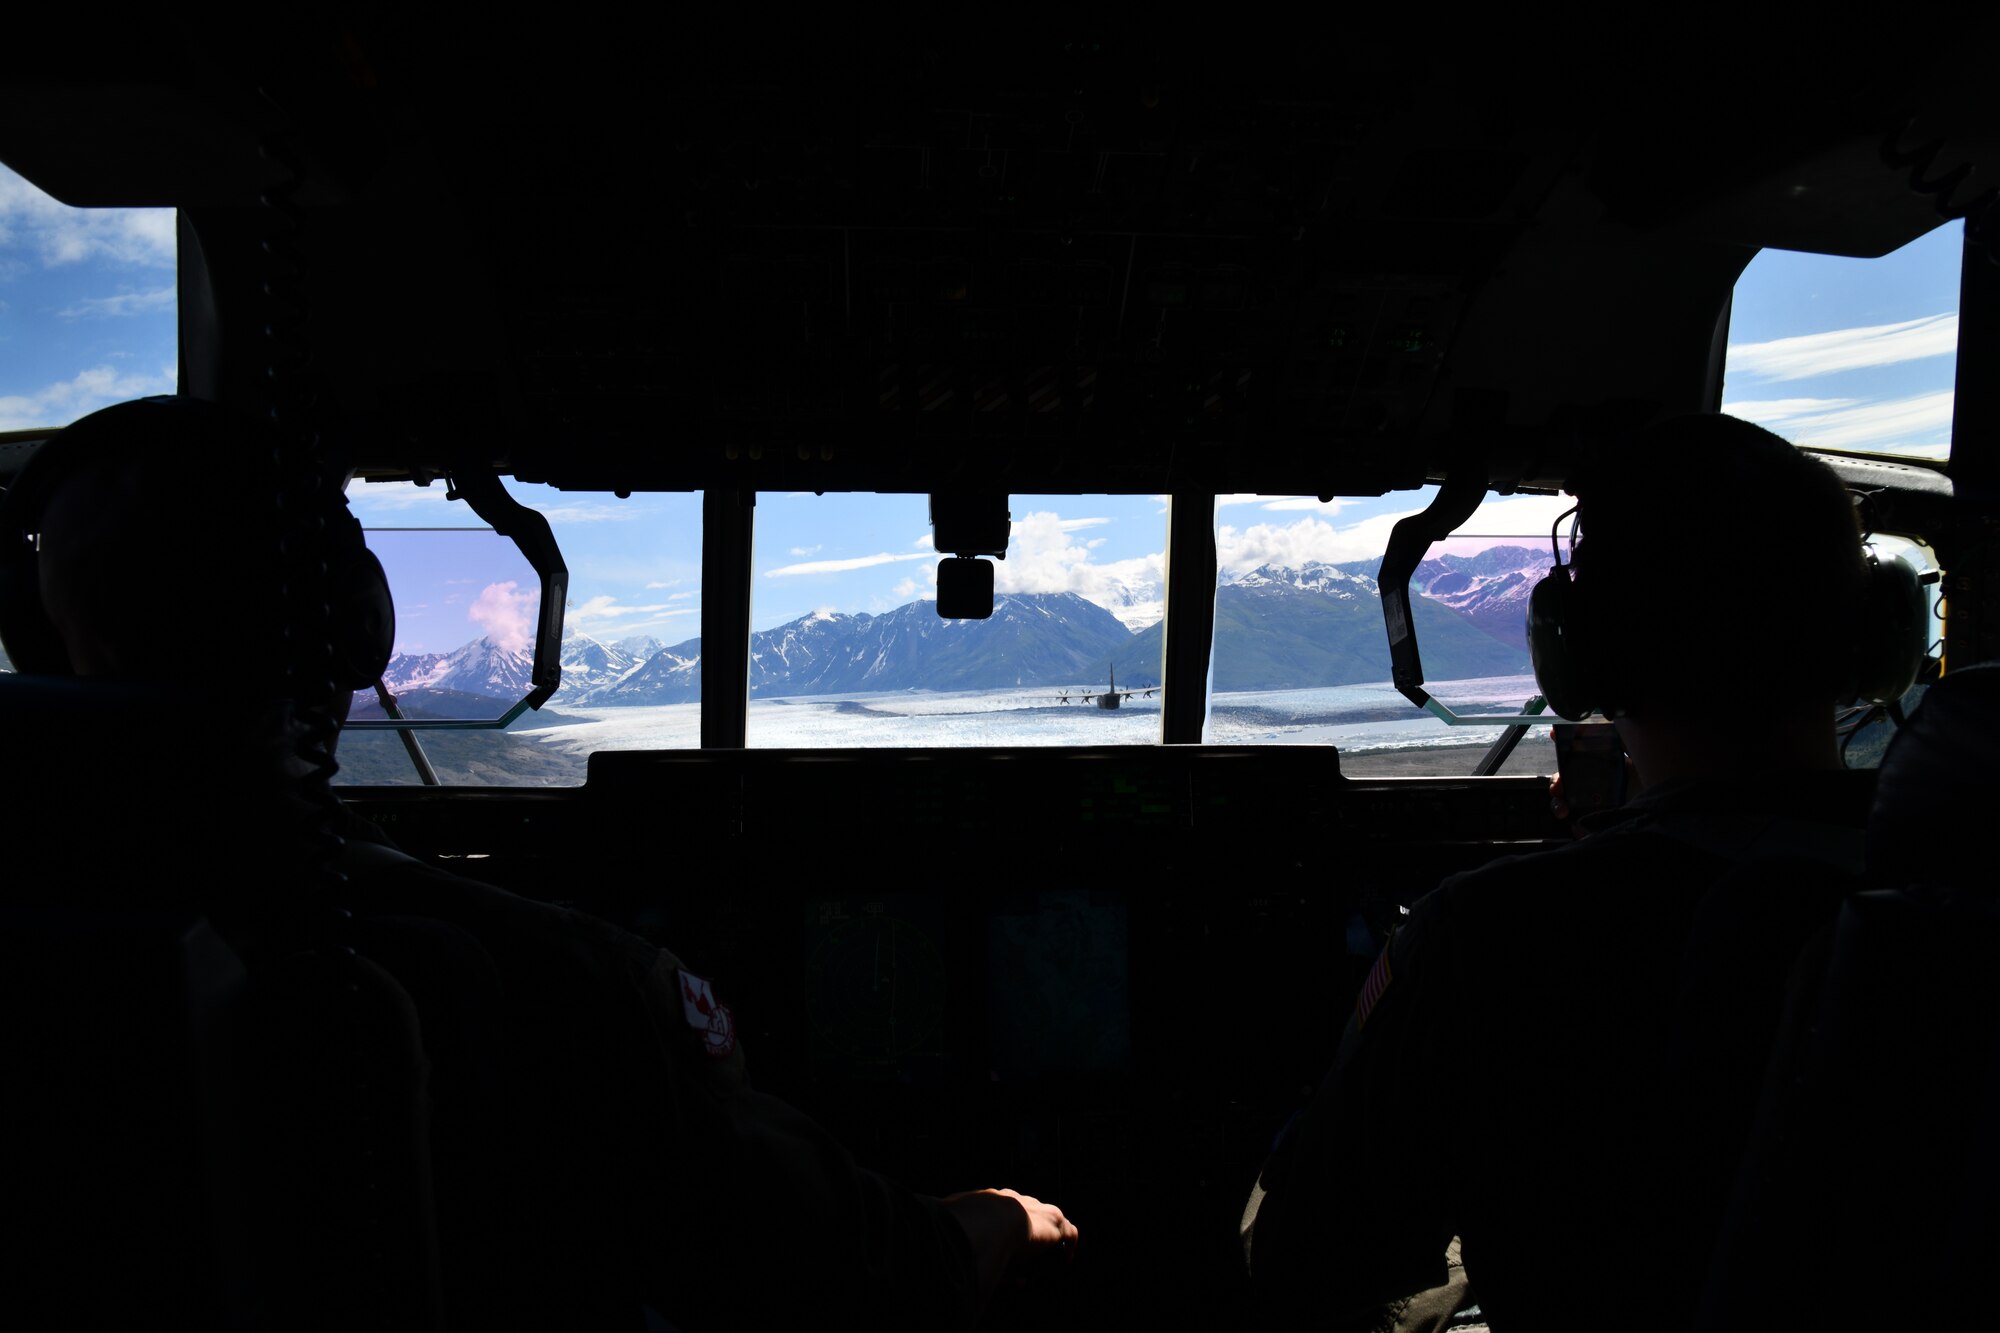 Maj. Scott Schavrien and 1st Lt. James Zock, 815th Airlift Squadron pilots, conduct low-level tactical flight training patterns during a training exercise at Joint Base Elmendorf-Richardson, Alaska, July 13-16, 2021. The terrain of the mountain, valleys and along with the colder temperatures provided a different challenge for the low-level flights, which were an effective tactic in training for hostile environments. (U.S. Air Force photo by Master Sgt. Jessica Kendziorek)